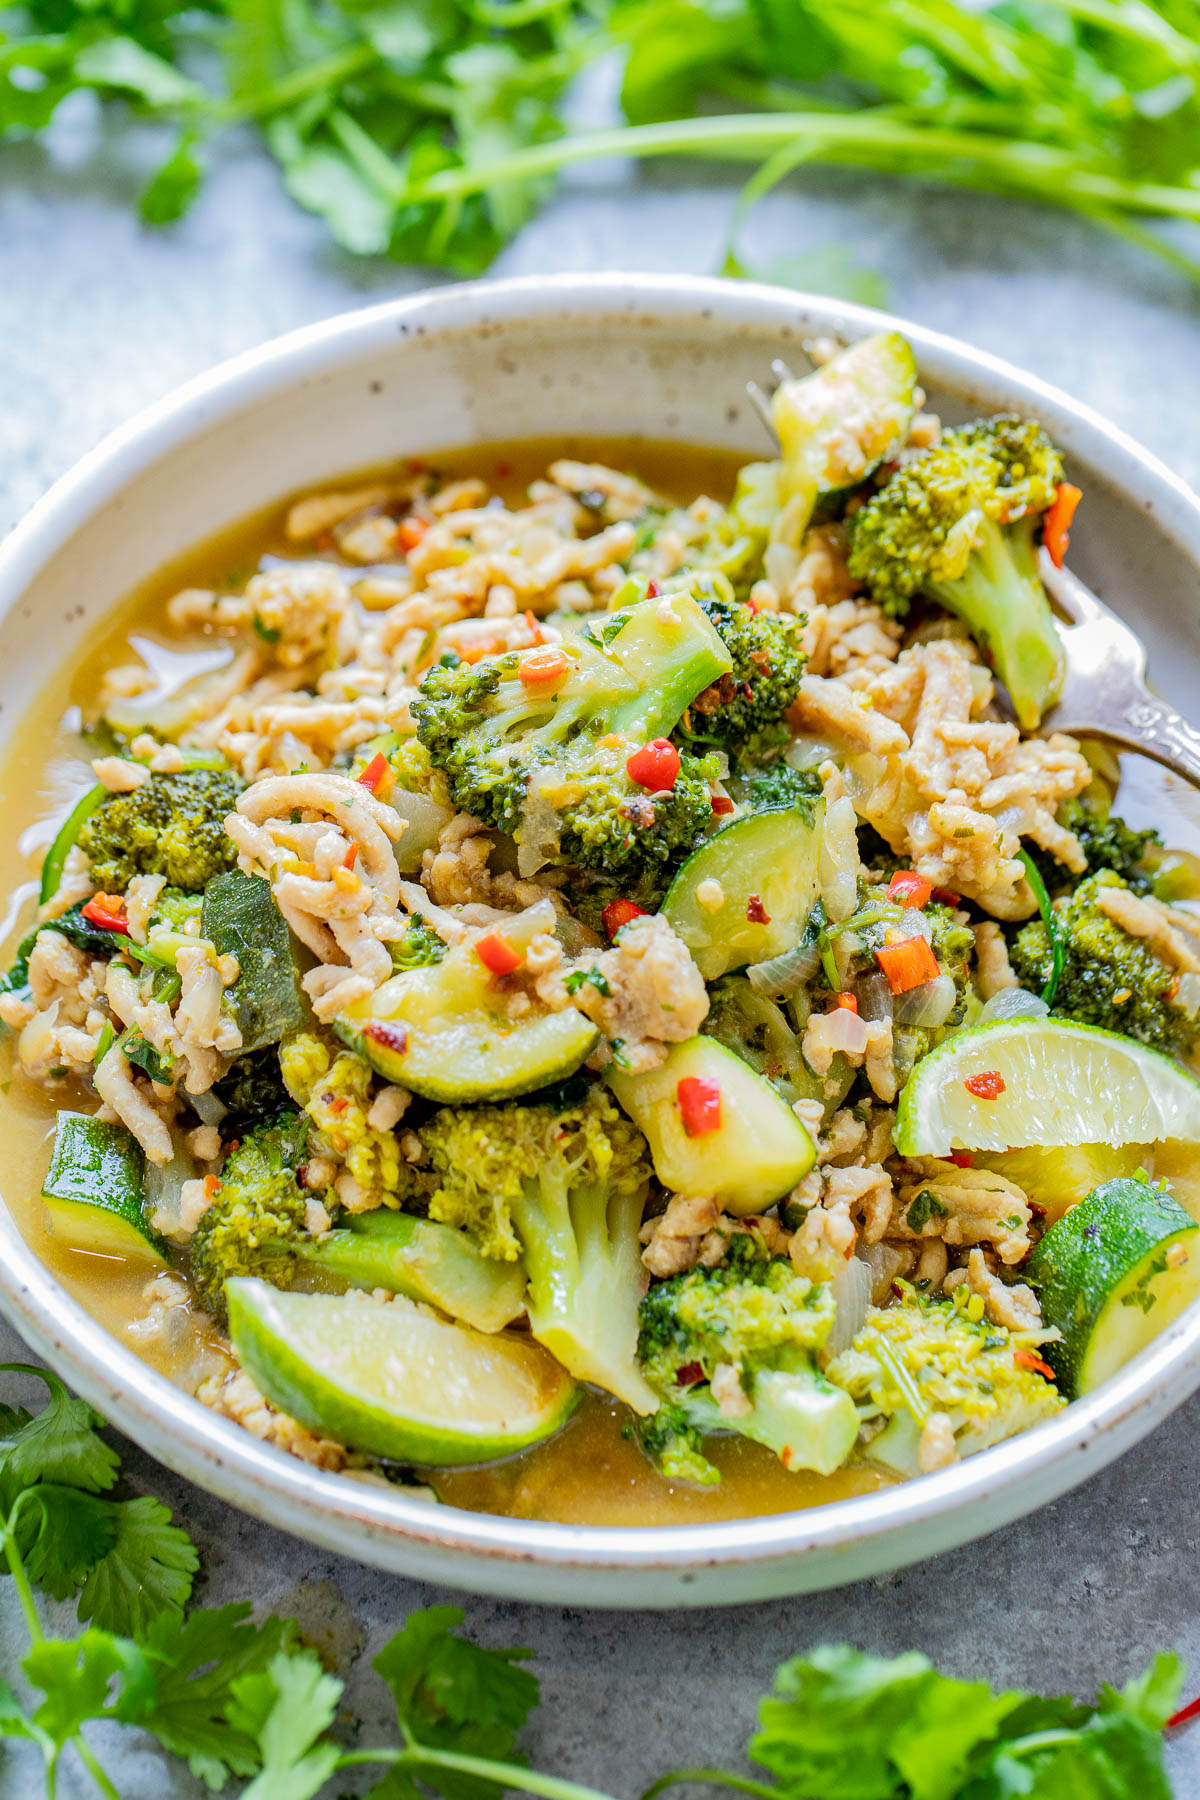 Ground Chicken Green Thai Curry - 💚 Skip takeout and make this EASY, one-skillet green curry with ground chicken and an array of healthy vegetables! Ready in under 30 minutes, great for busy weeknights, and tastes BETTER than from a Thai restaurant! Healthy yet hearty comfort food that tastes AMAZING and is naturally gluten-free.